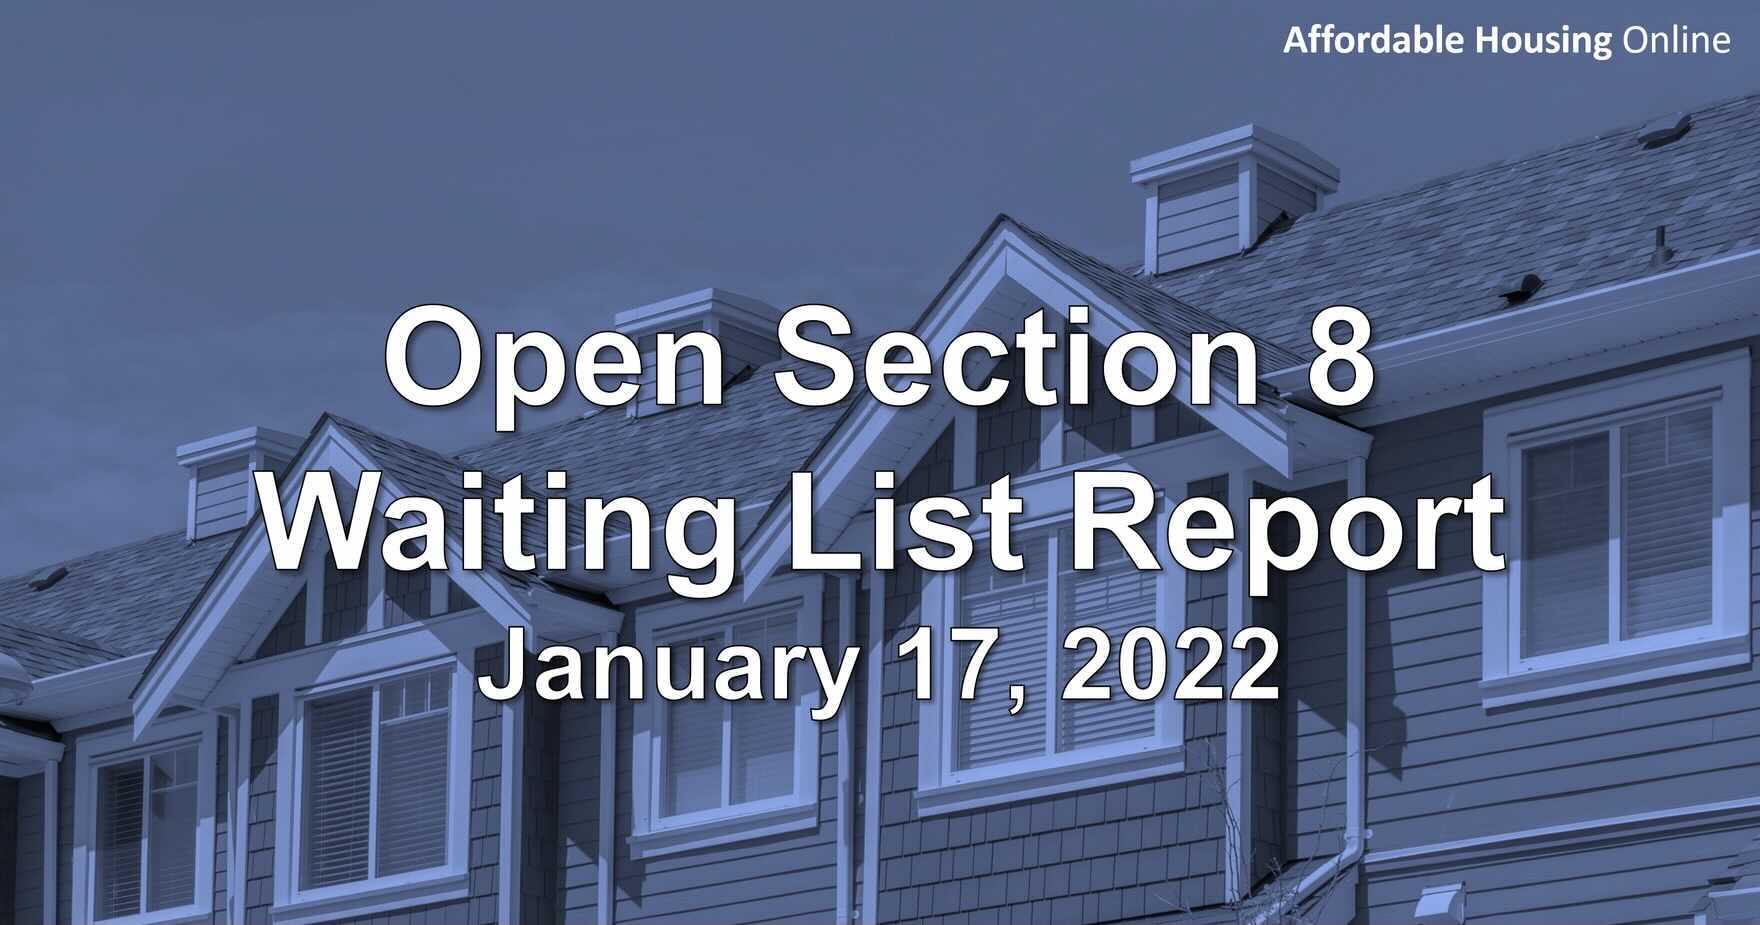 Open Section 8 Waiting List Report: January 17, 2022